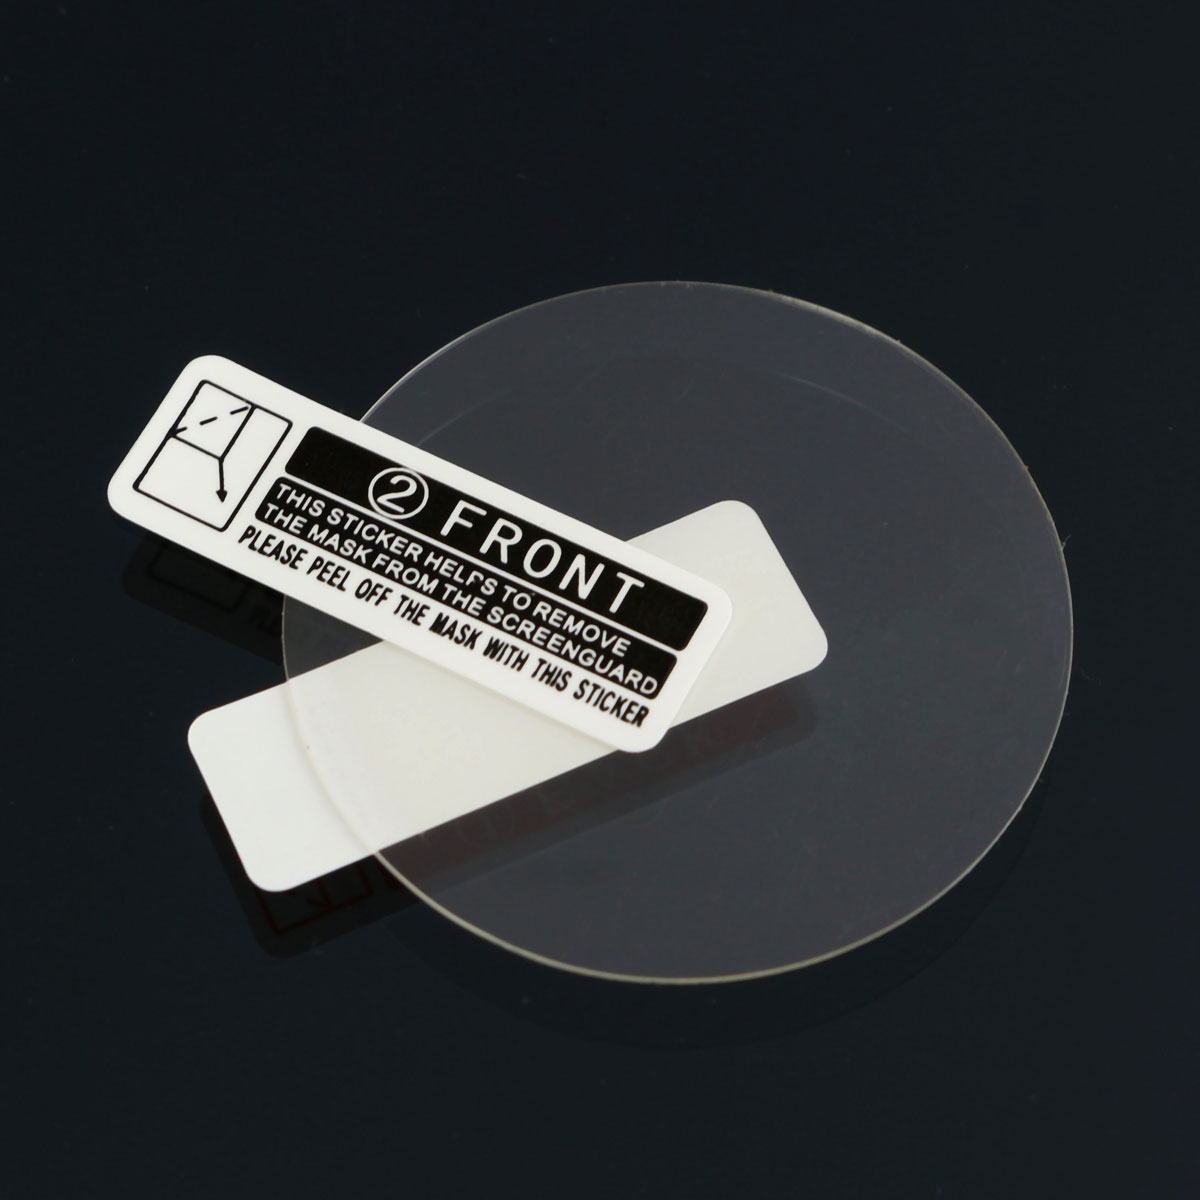 38mm-Anti-Scratch-Clear-Screen-Protector-Film-Shield-Cover-For-LEMFO-LES1-LEMFO-LEM5-PRO-I4-AIR-1048914